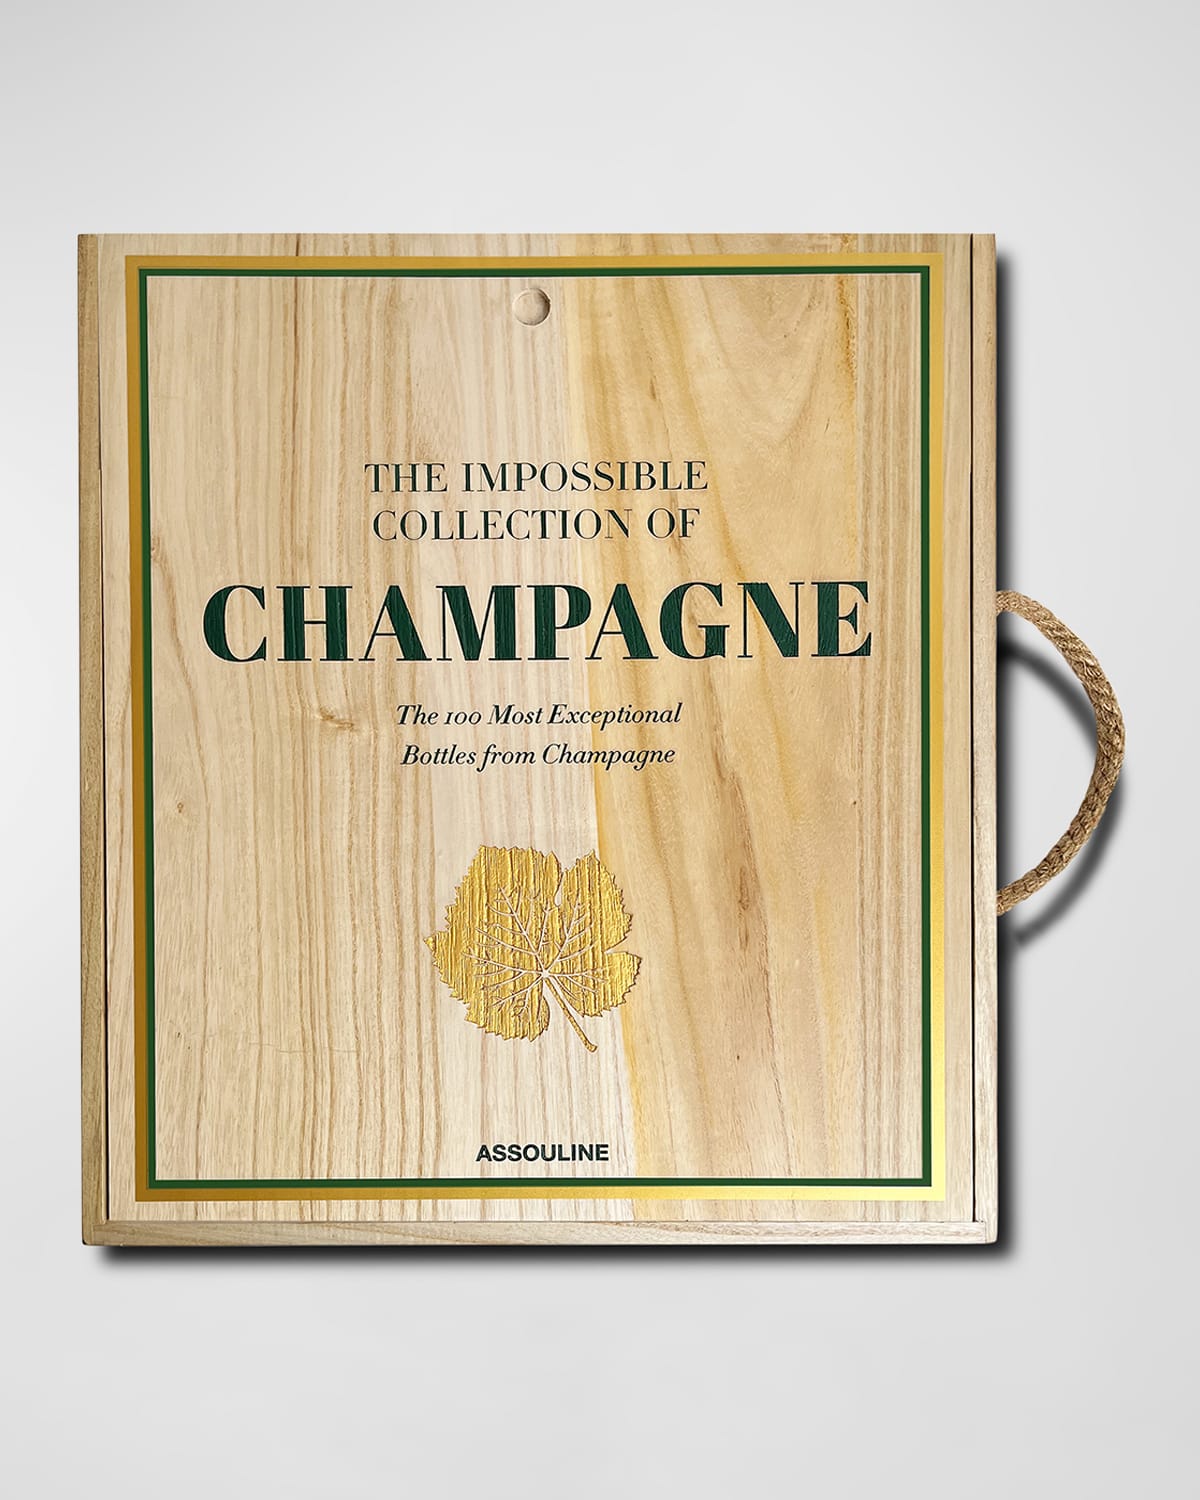 The Impossible Collection of Champagne: The 100 Most Exceptional Bottles from Champagne Book by Enrico Bernardo